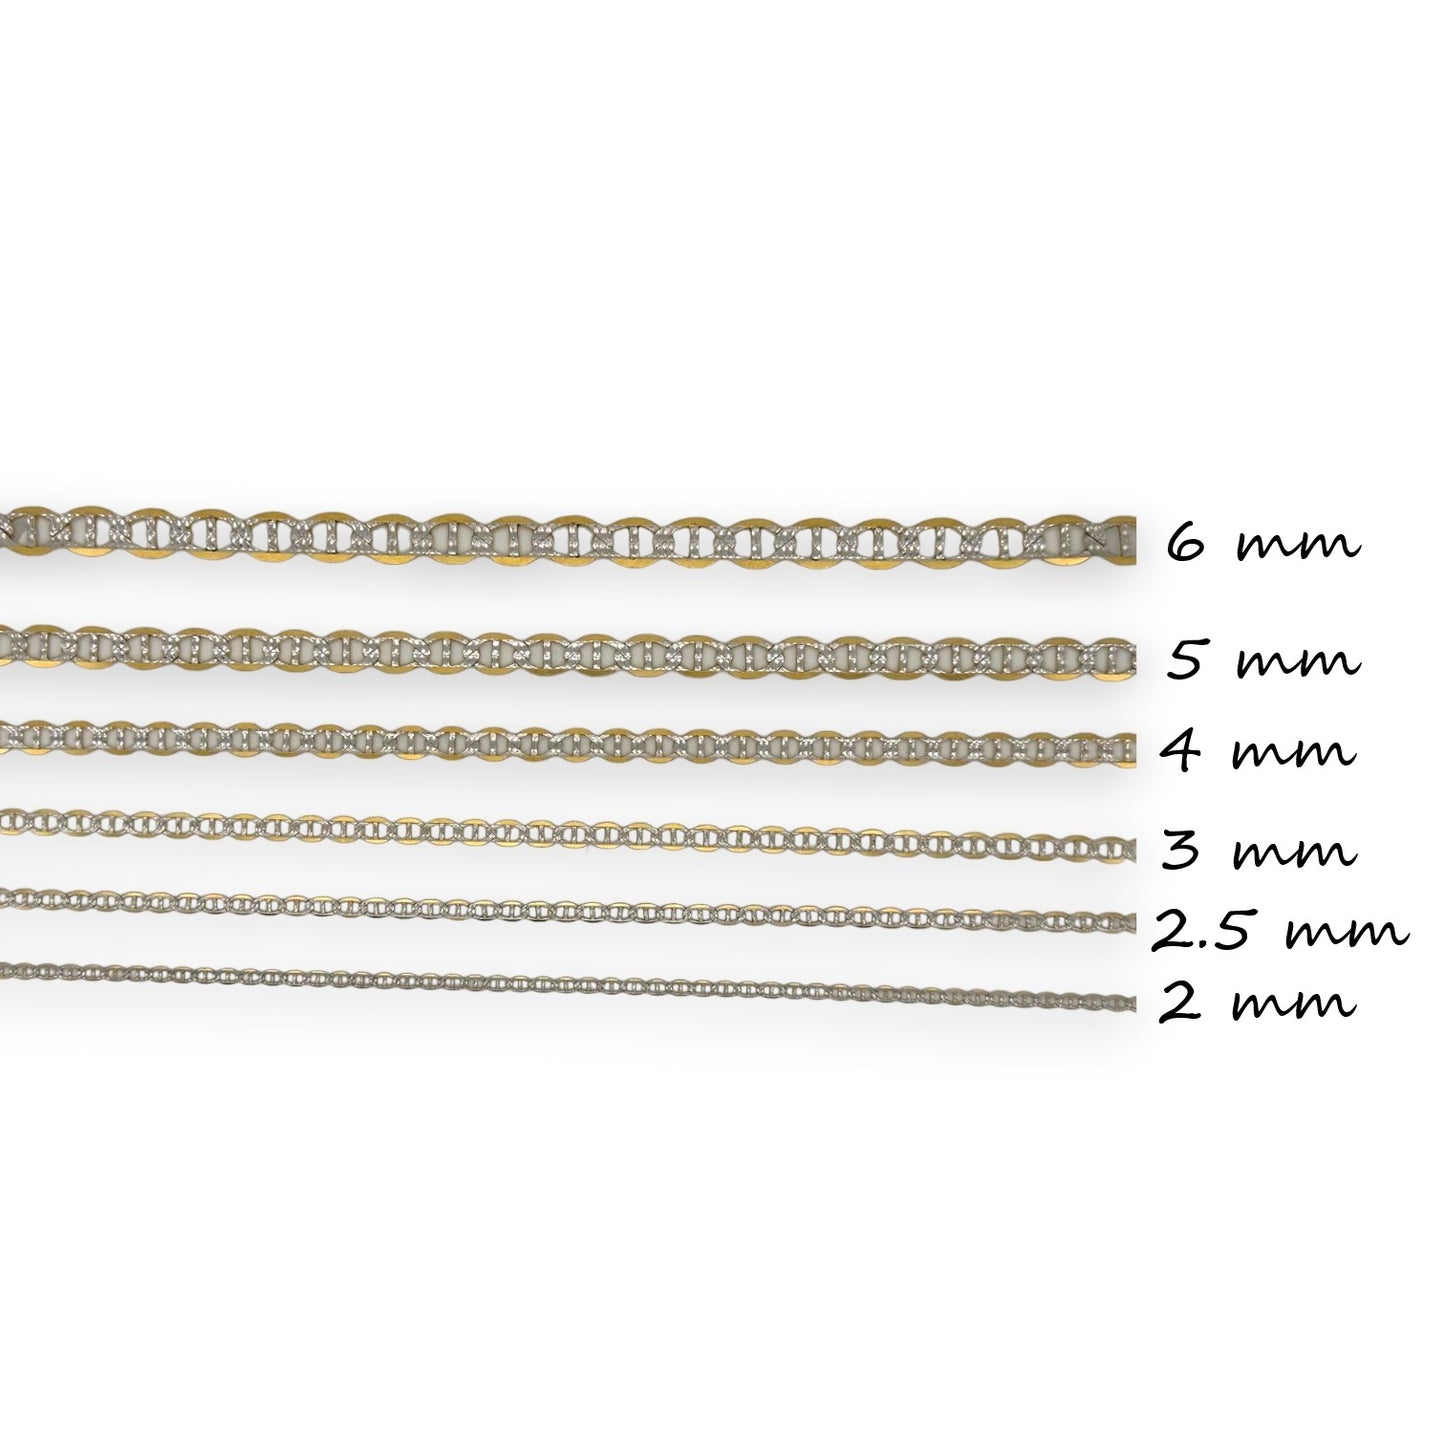 10K Fully Solid Valentino Two Tone Link Anklet - 10K Yellow Gold